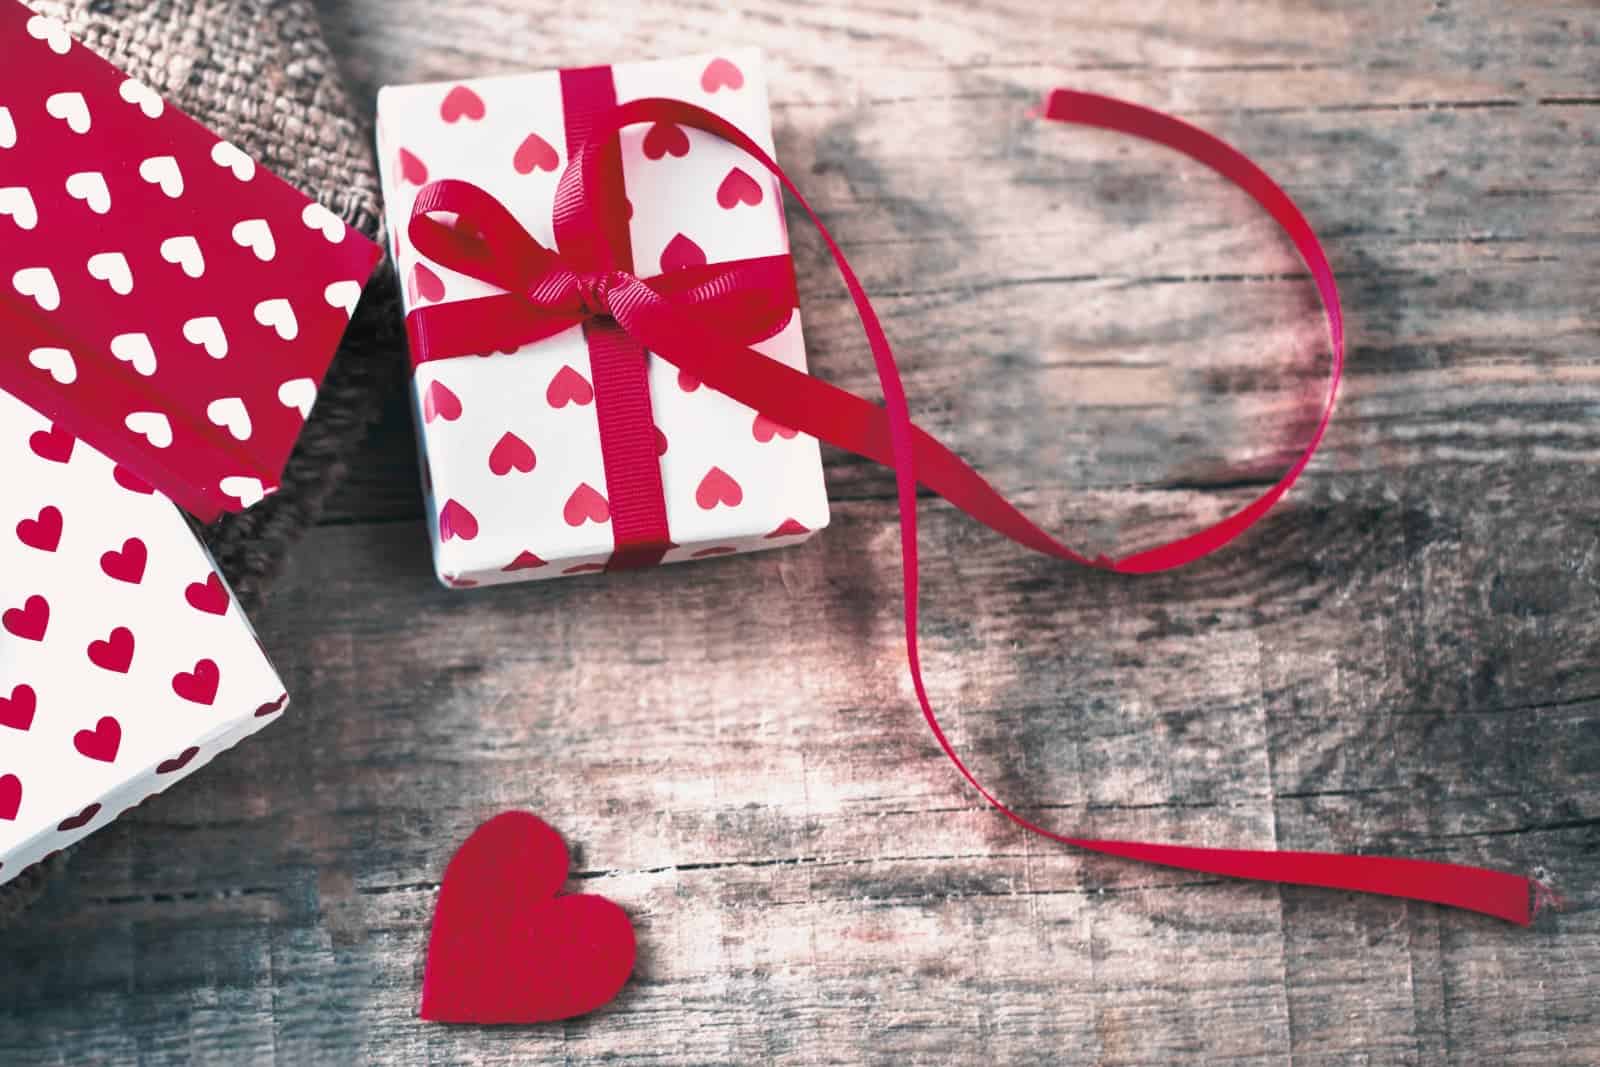 Valentine's gifts wrapped in red and white paper covered with small hearts, on a wood grain background